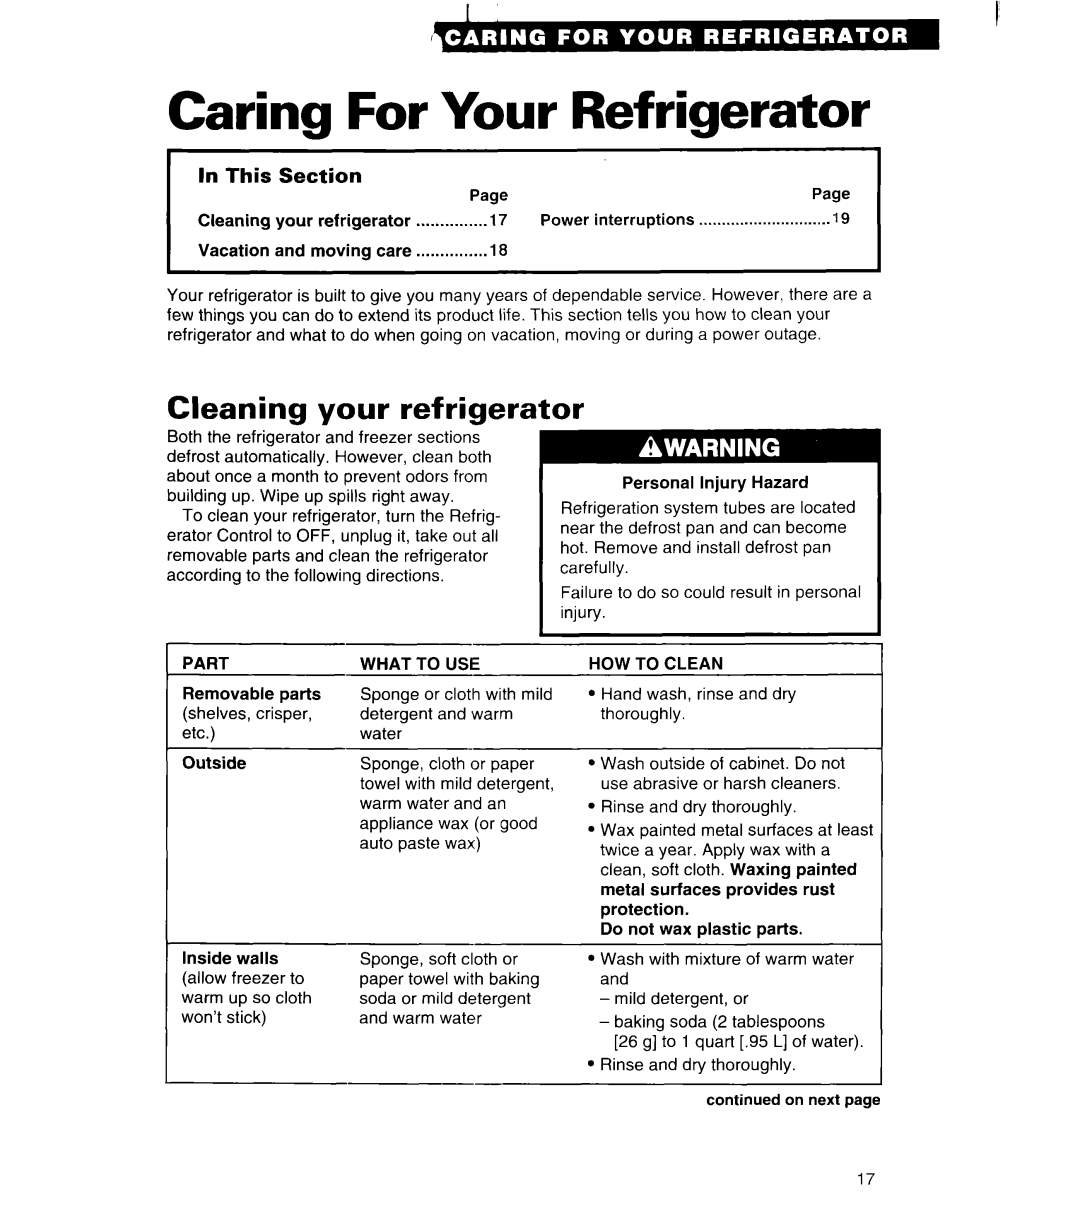 Whirlpool ET25DK important safety instructions Caring For Your Refrigerator, Cleaning your refrigerator, In This Section 